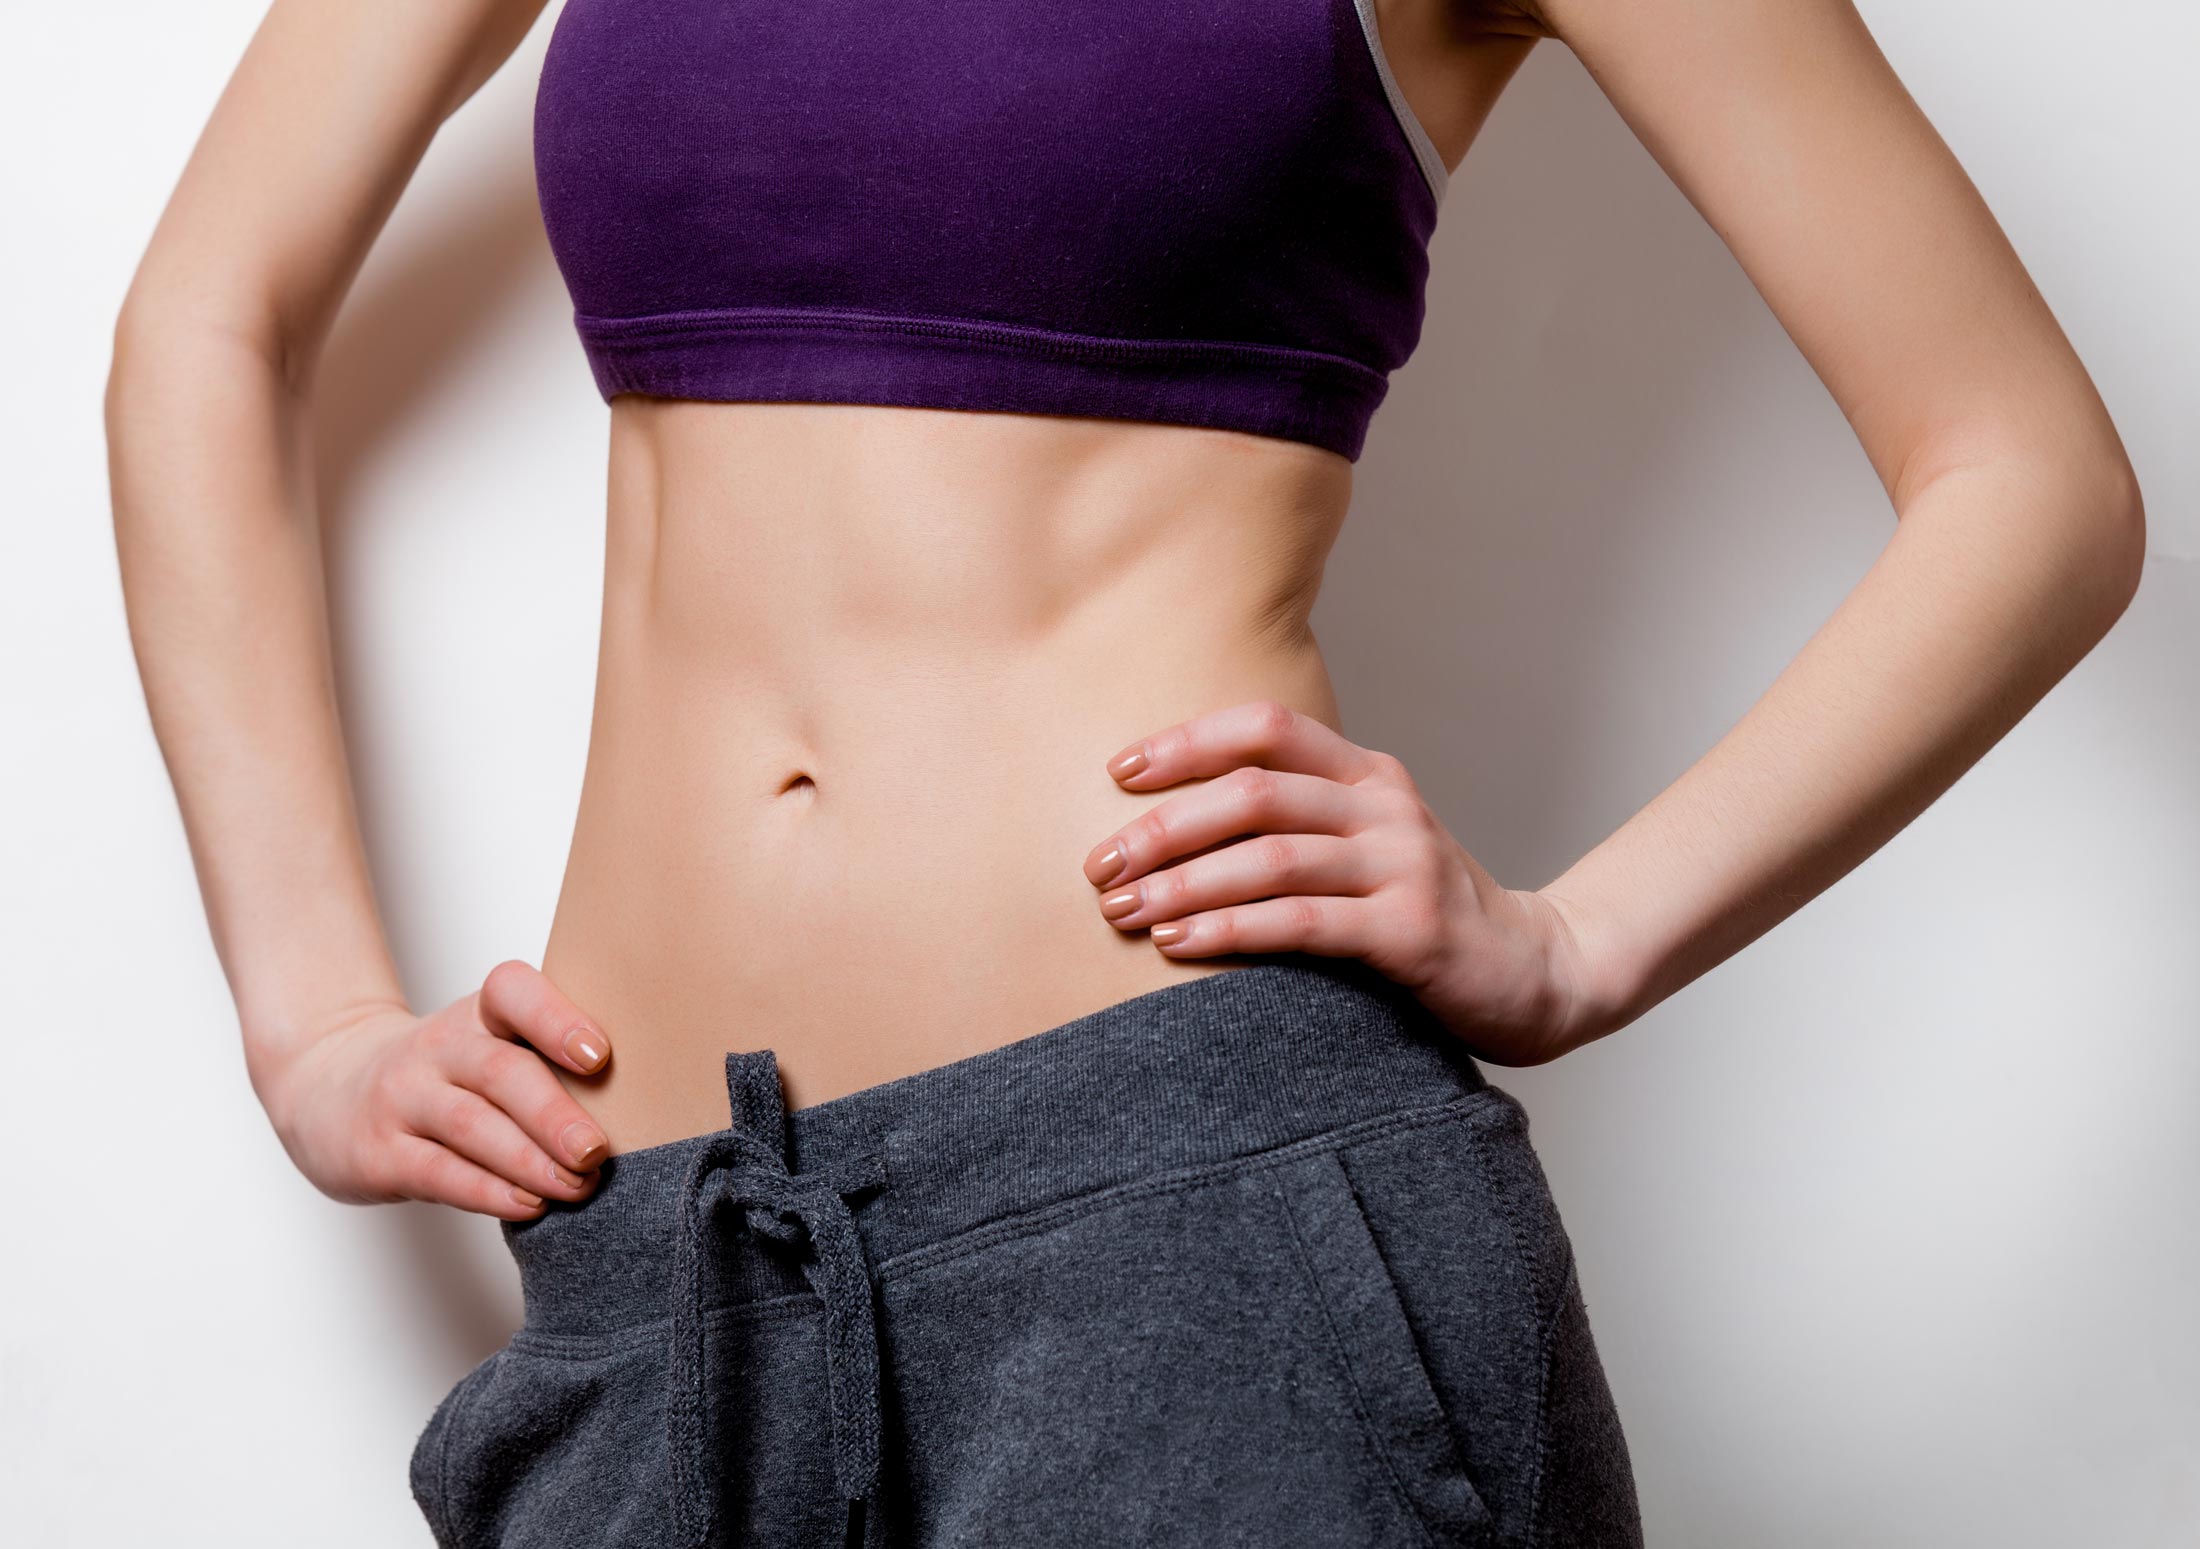 https://synergymedicalbc.com/wp-content/uploads/flat-abs-after-tummy-tuck-victoria-plastic-surgeon.jpg